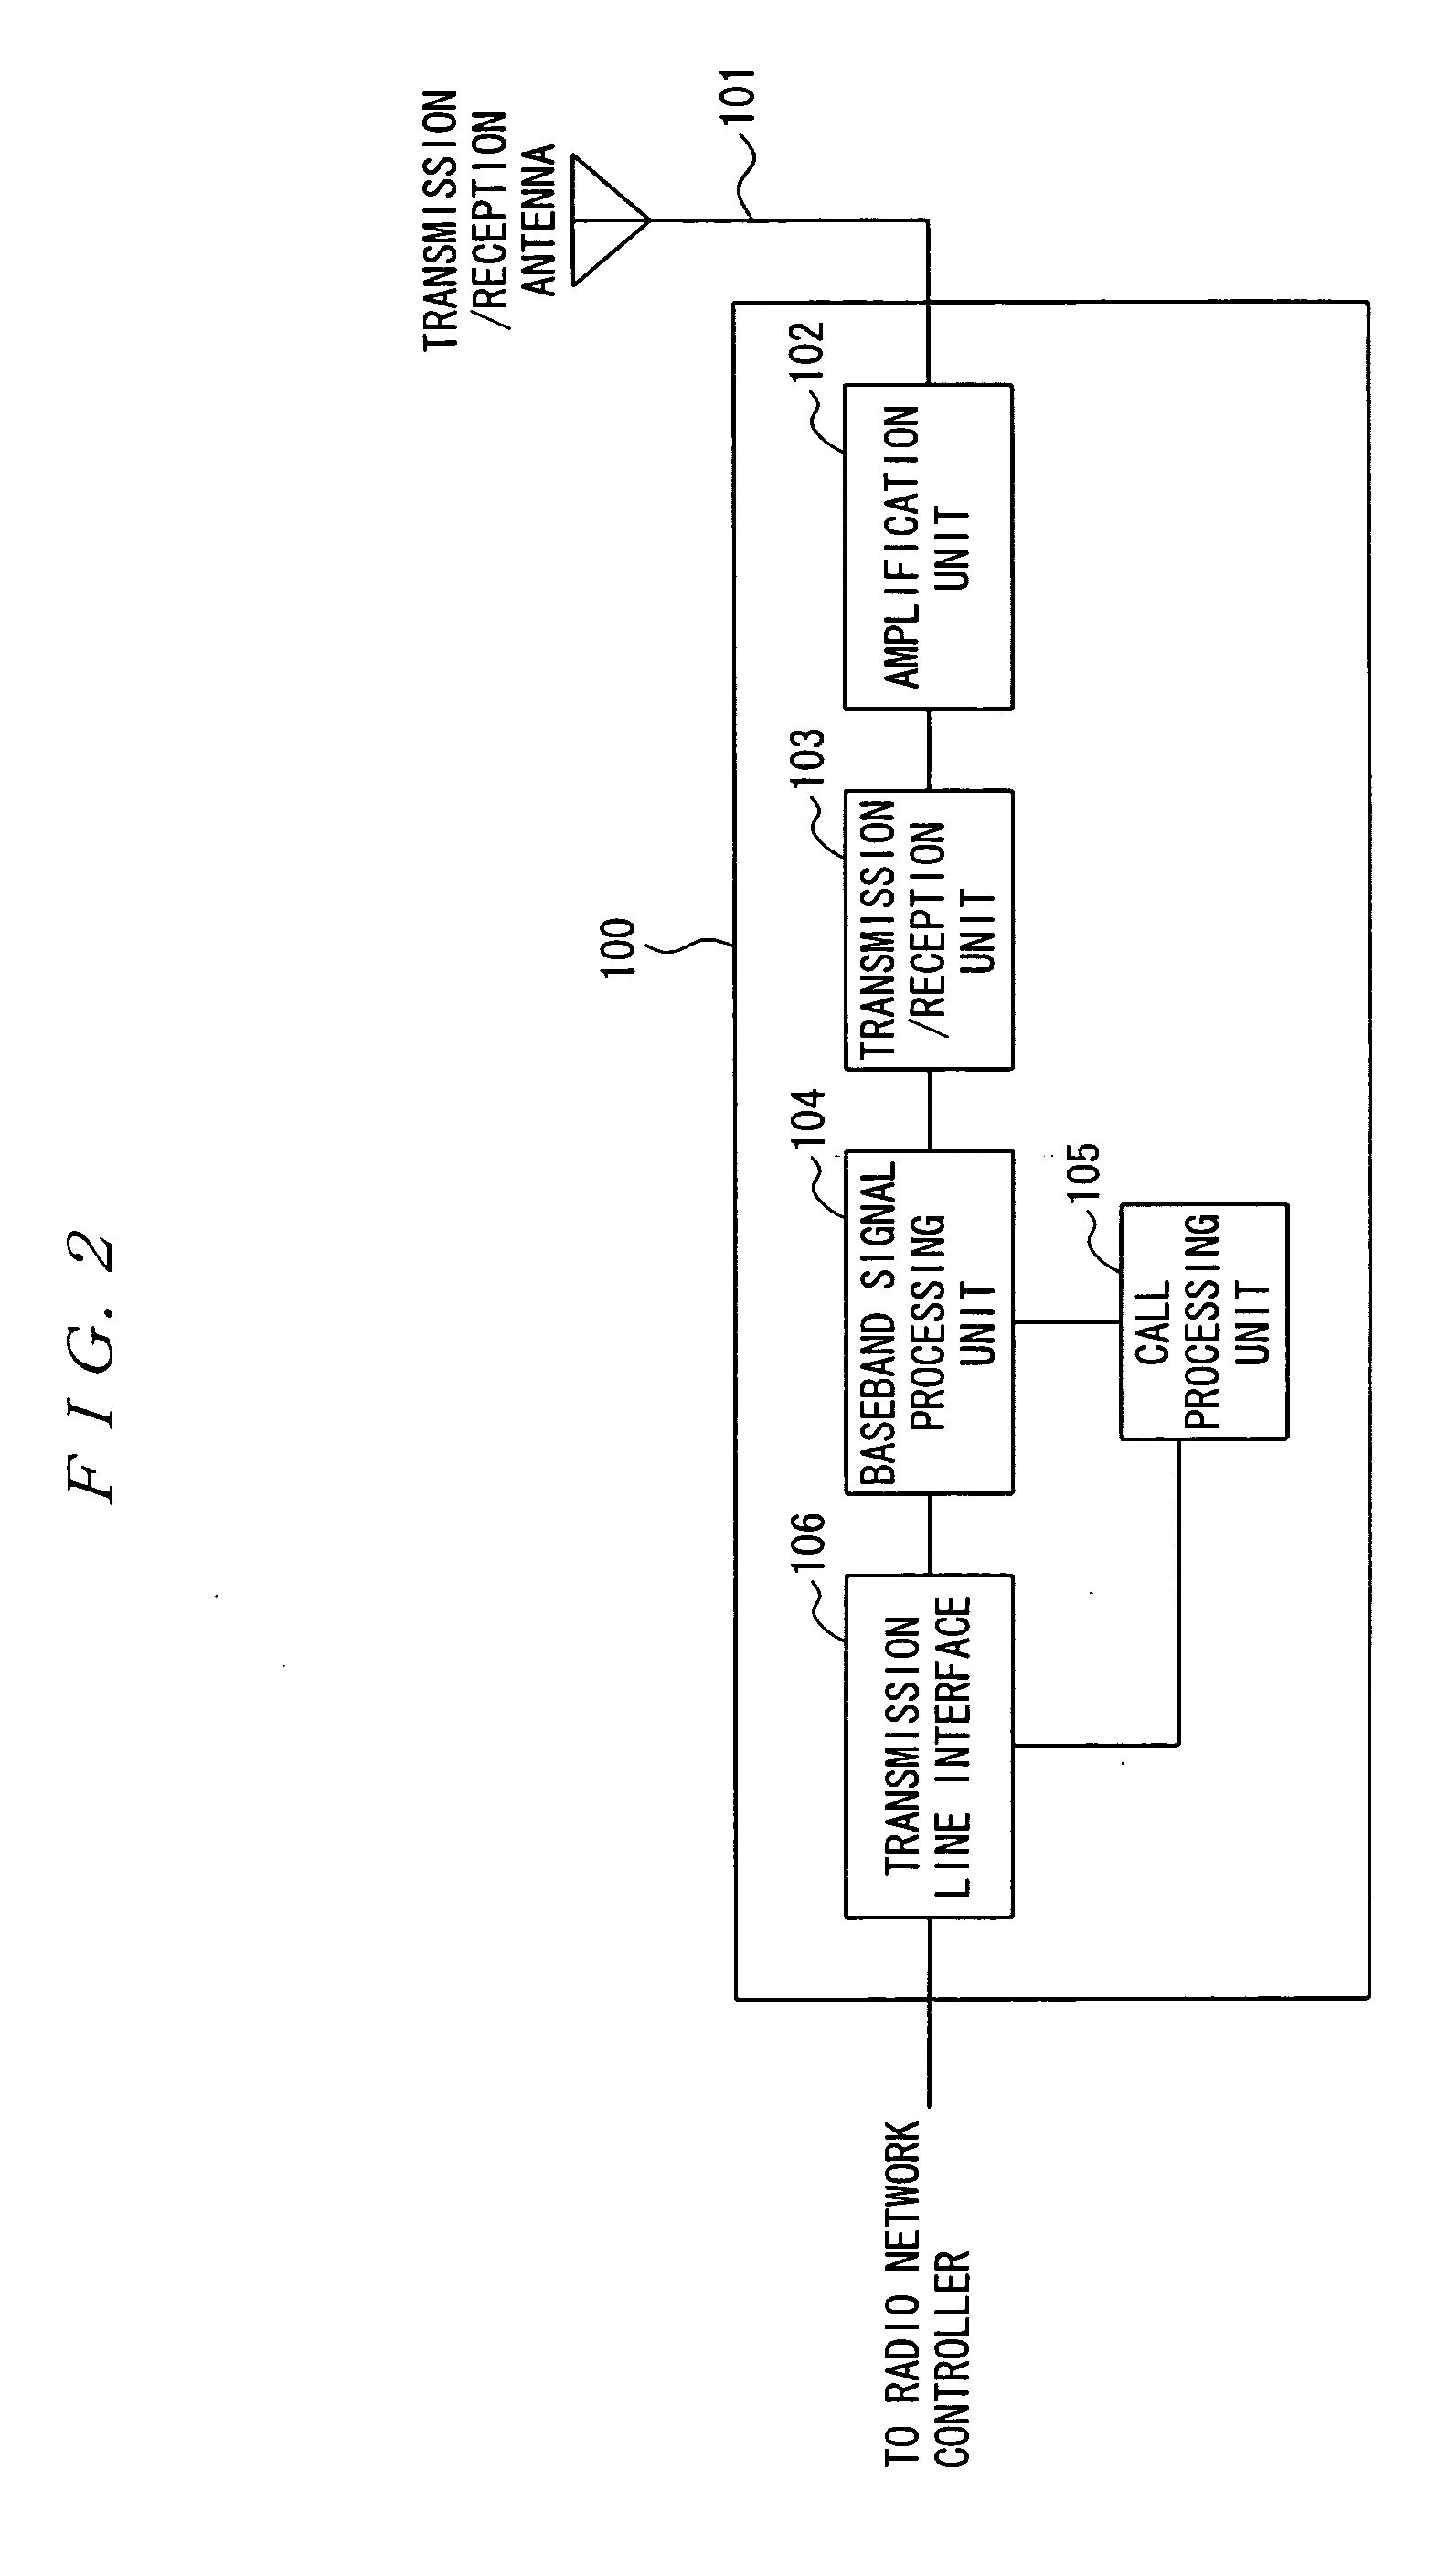 Call admission control device and call admission control method